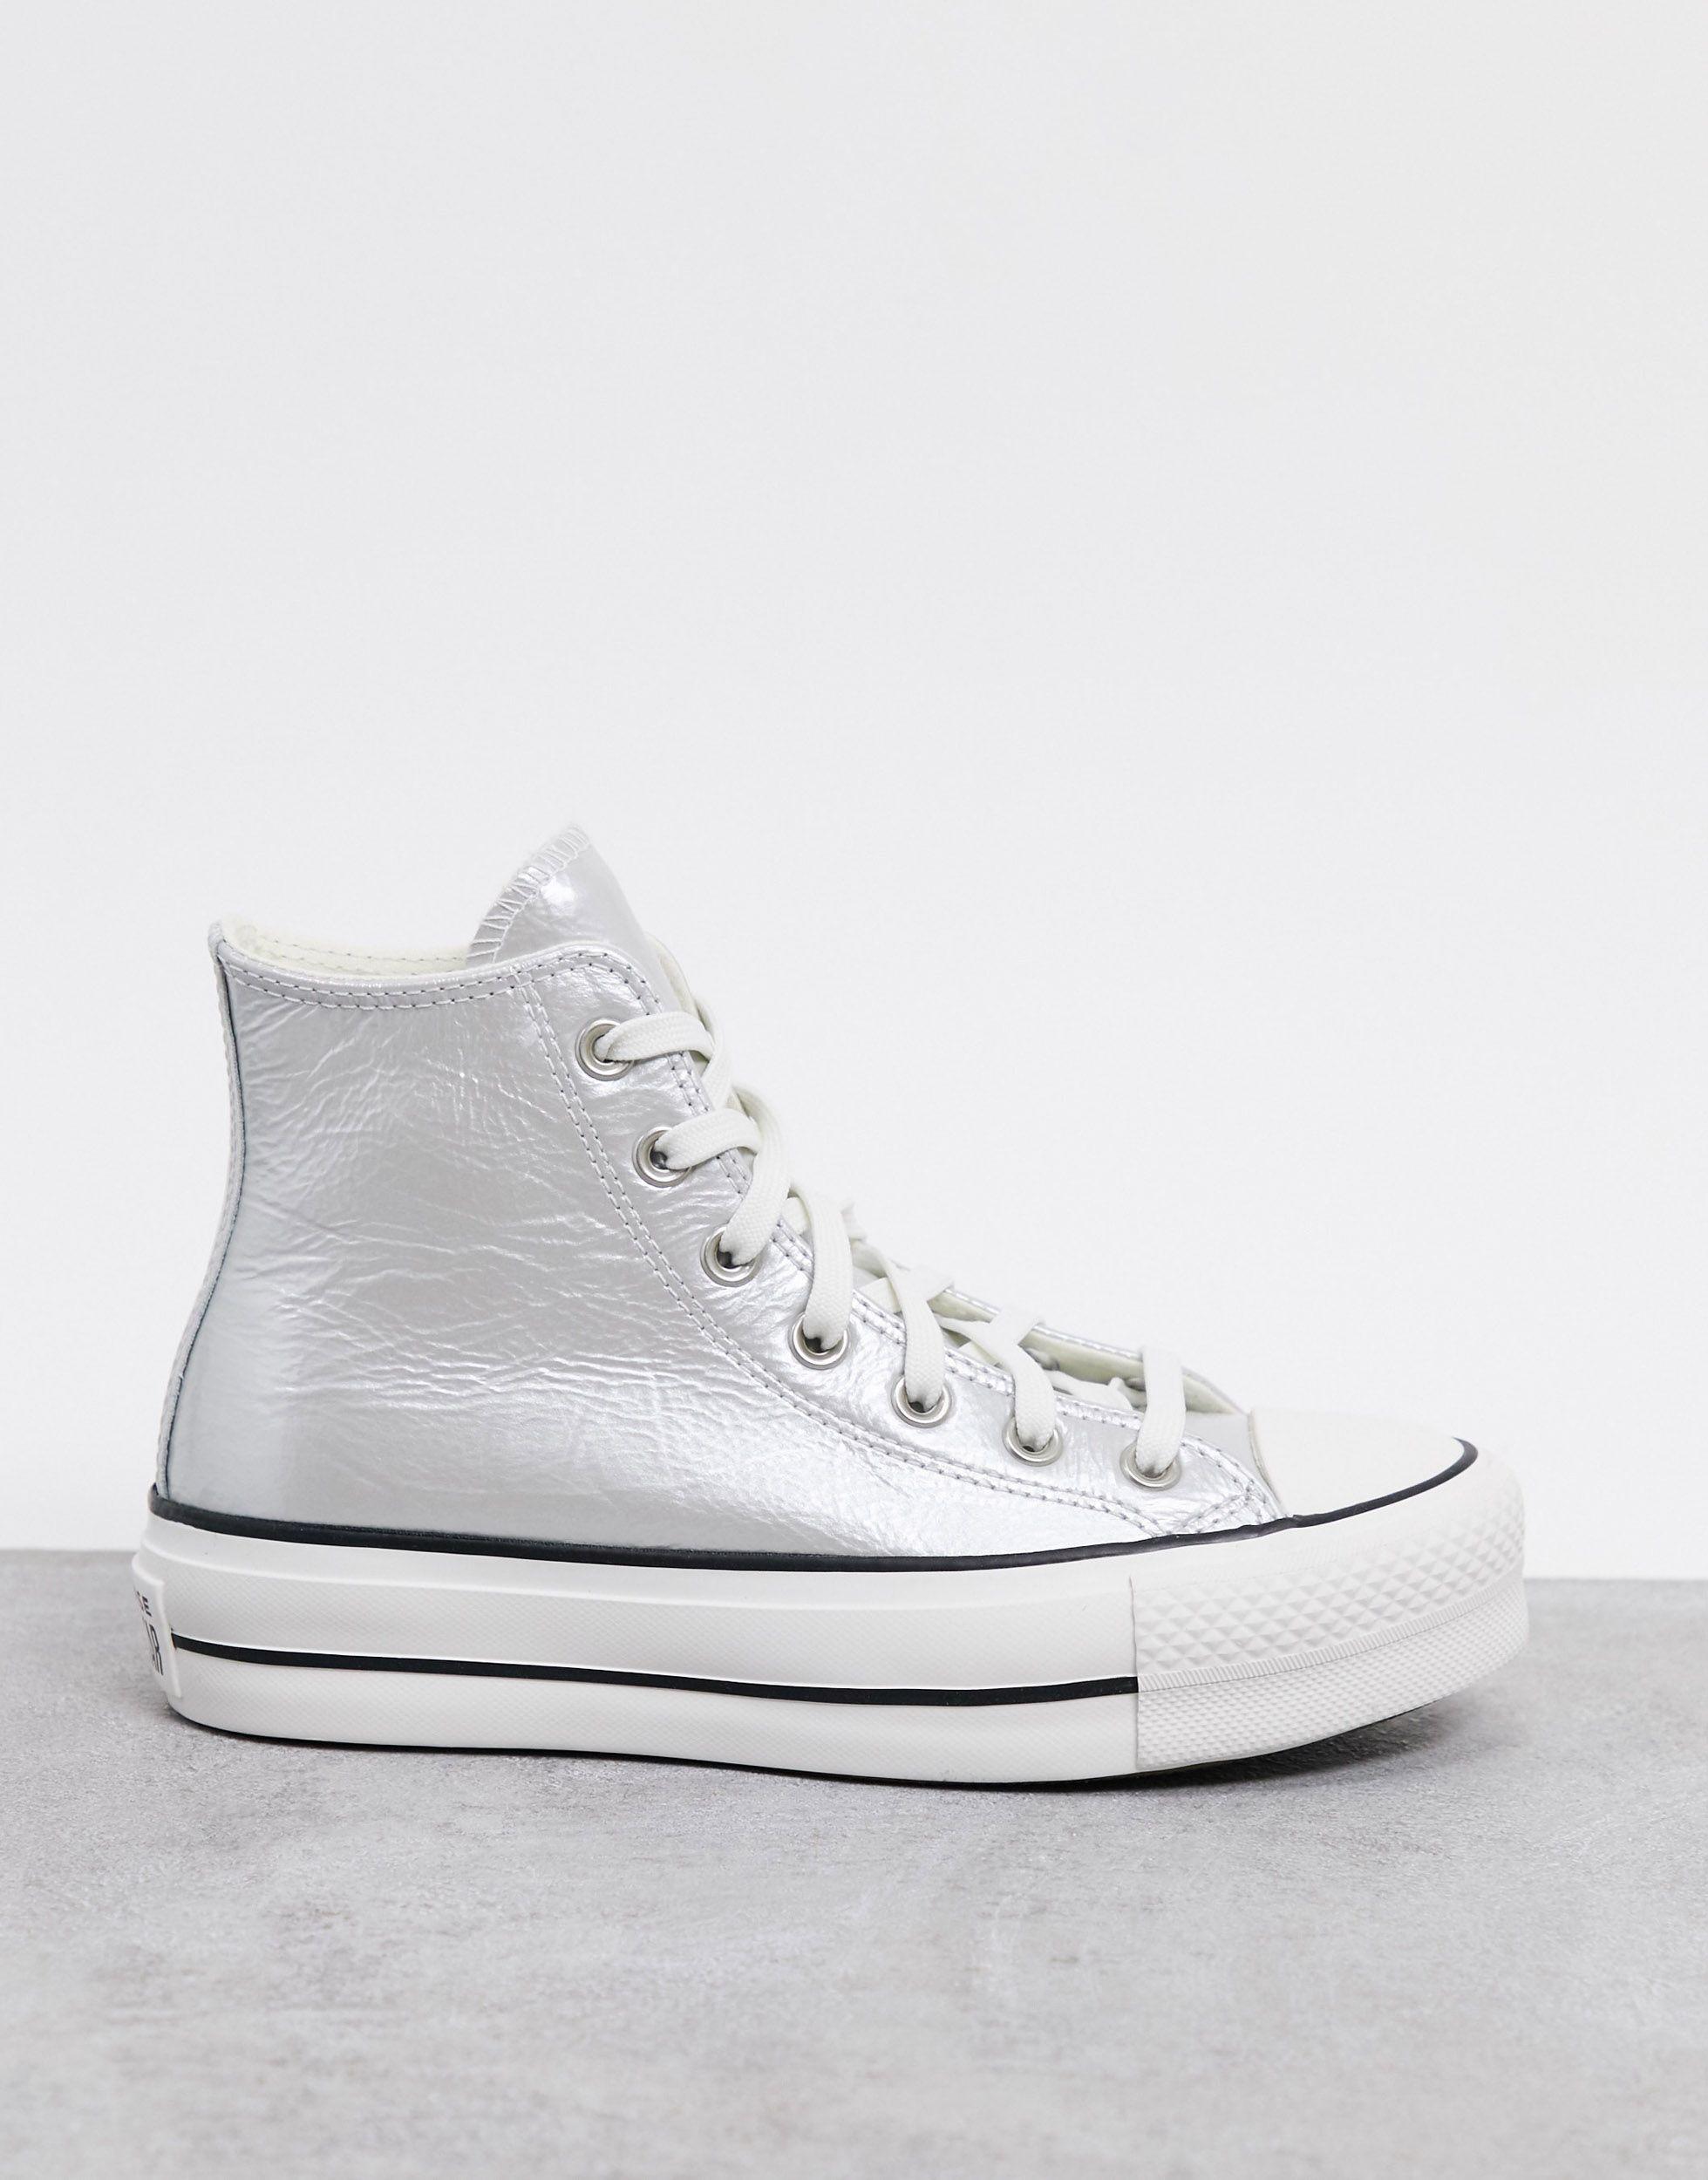 Converse Rubber Chuck Taylor All Star Hi Lift Sneakers in Silver (Metallic)  | Lyst